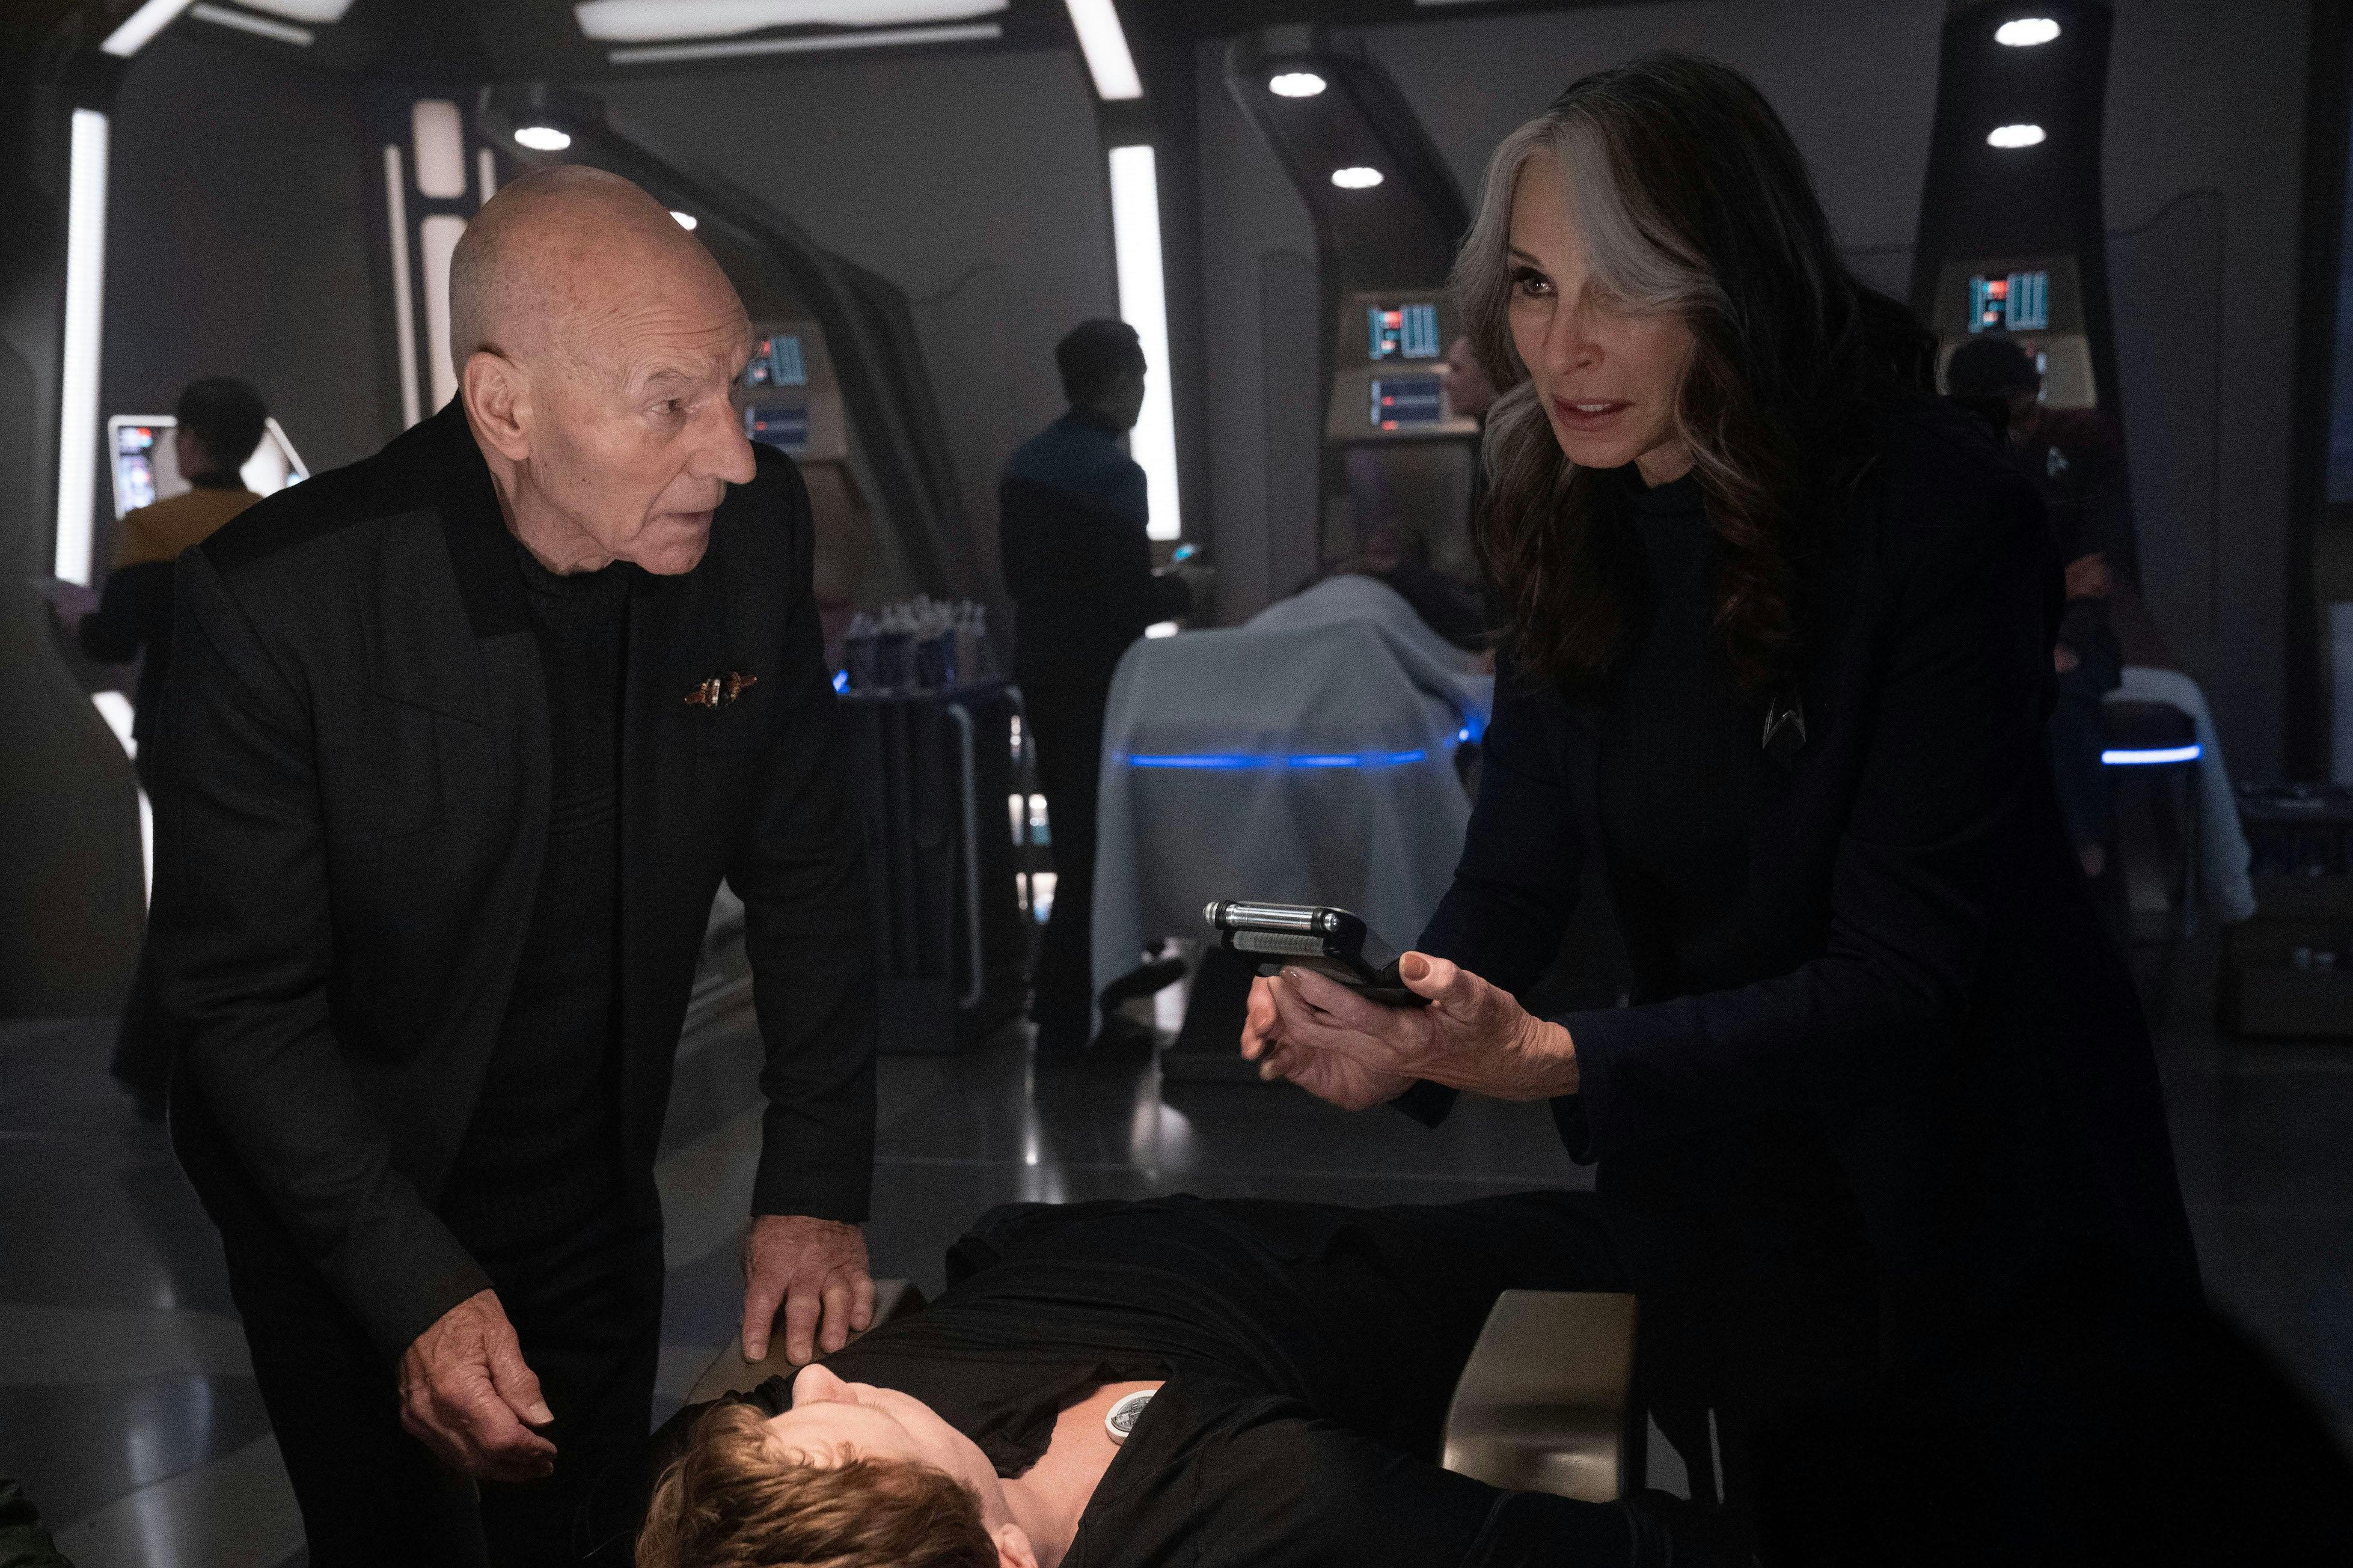 In Sickbay, Dr. Beverly Crusher looks over a poisoned Jack Crusher's vitals as a concerned Picard stands by